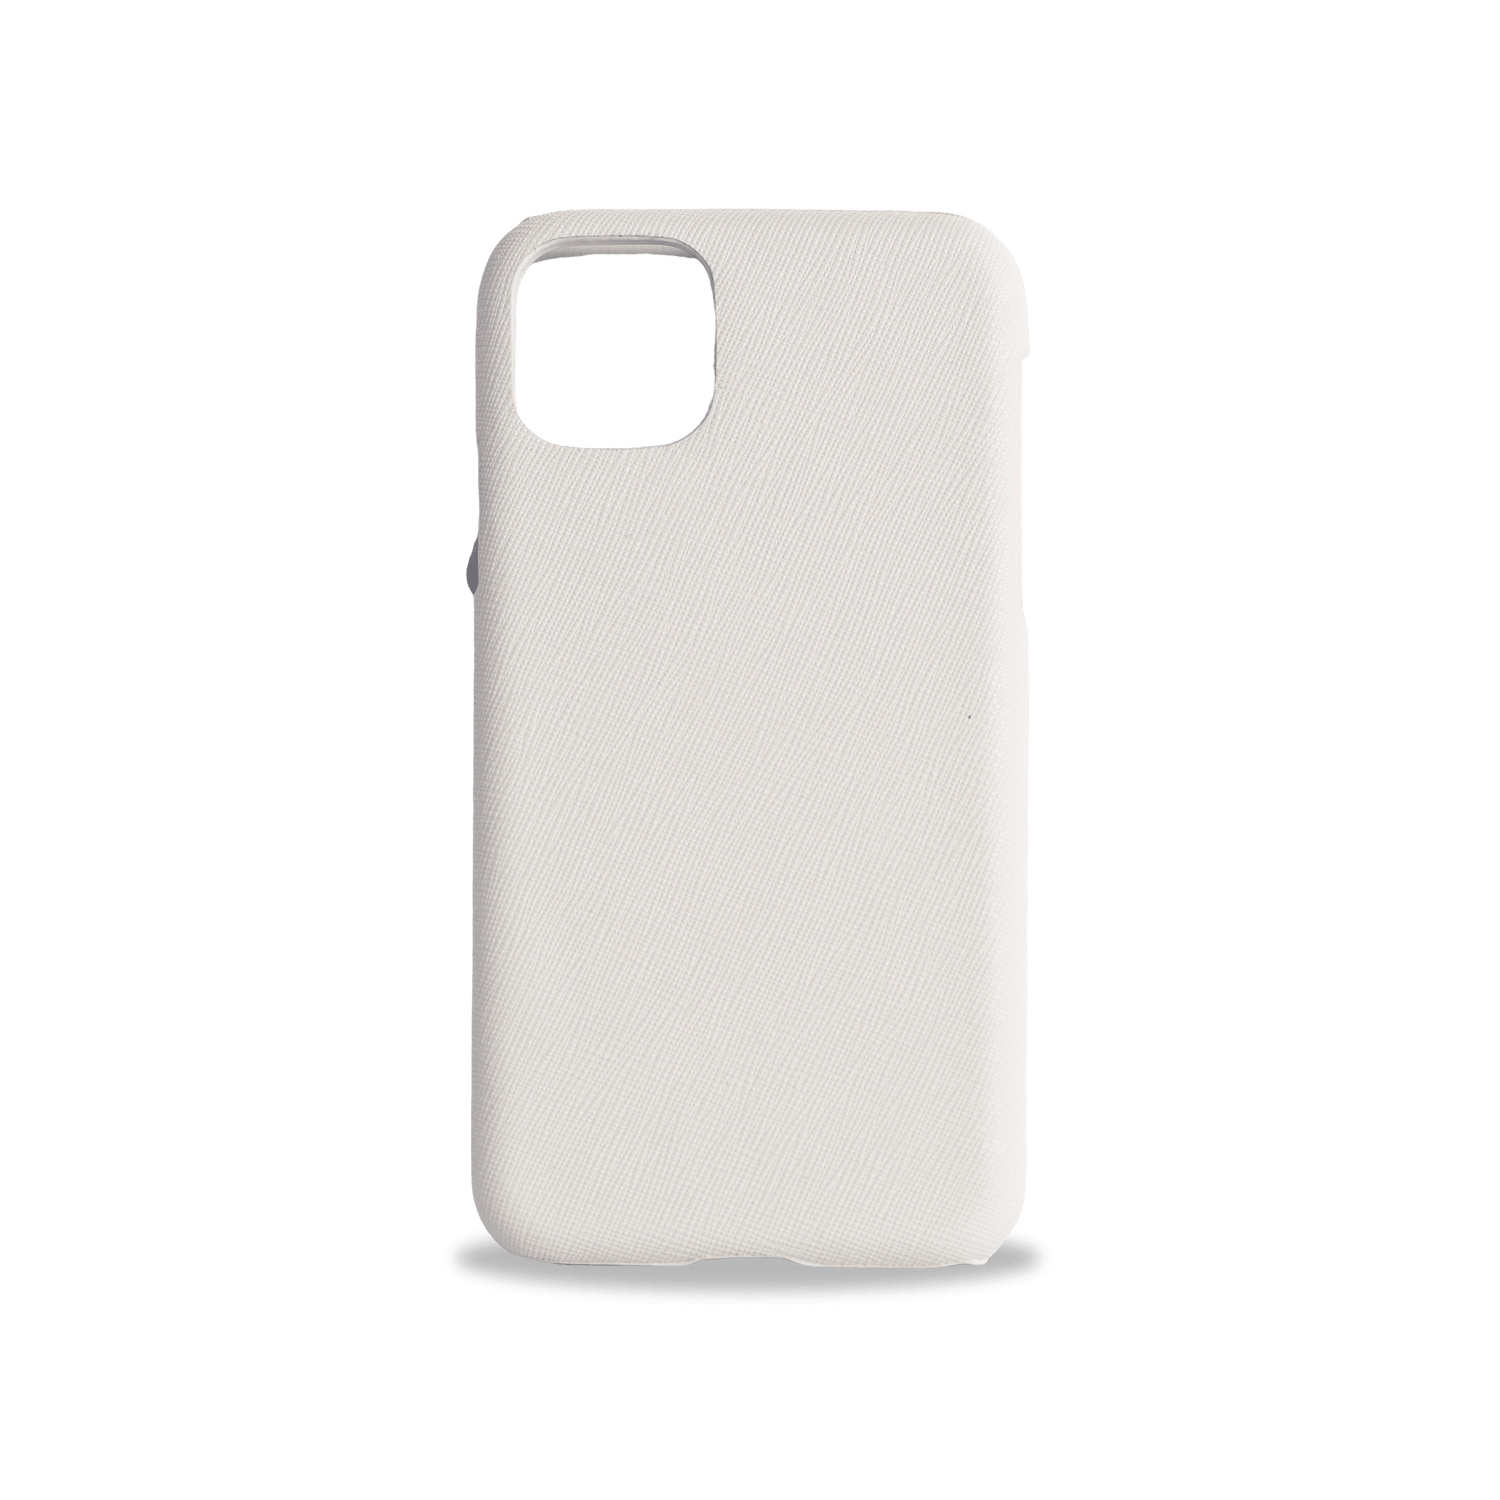 iPhone 11 case grey - Personal Press